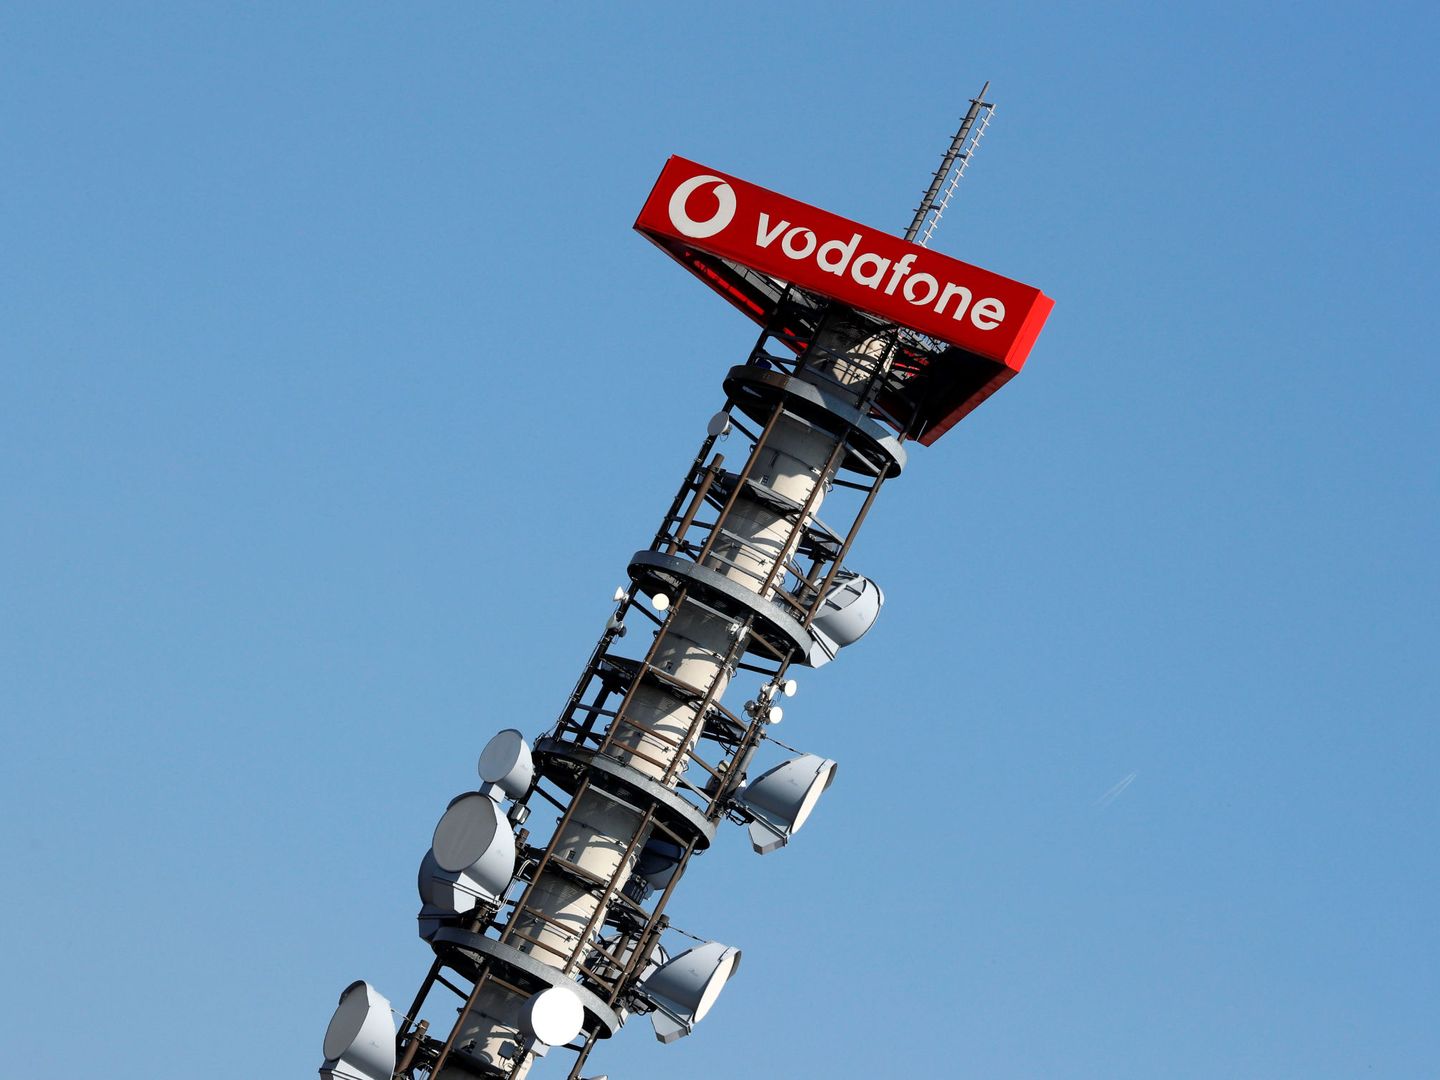 Different types of 4G, 5G and data radio relay antennas for mobile phone networks are pictured on a relay mast operated by Vodafone in Berlin, Germany April 8, 2019.     REUTERS Fabrizio Bensch